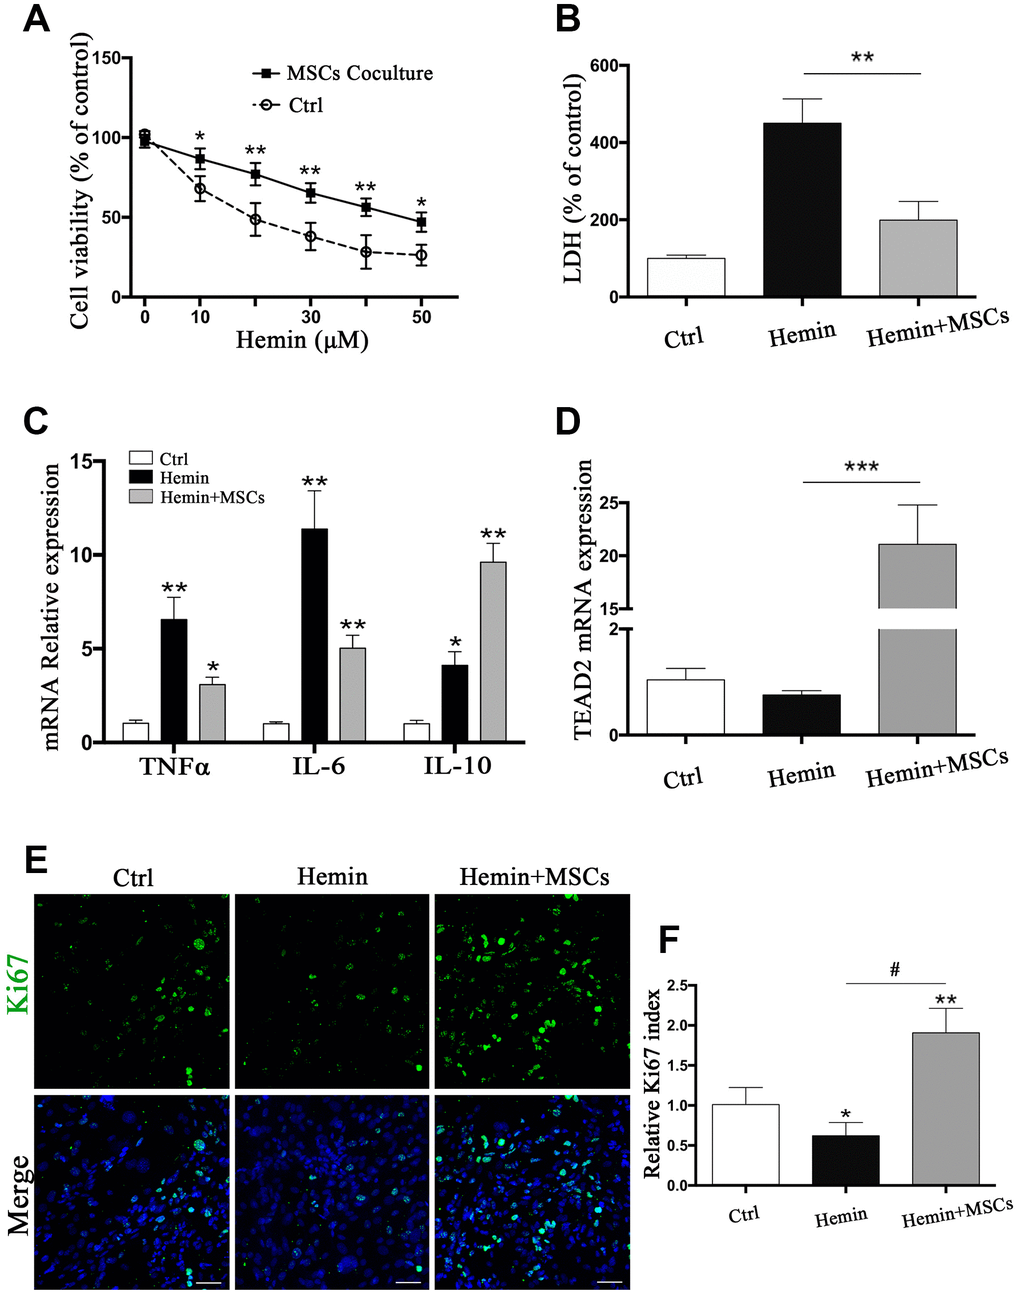 BM-MSCs coculture protected astrocytes from neurotoxicity induced by hemin. (A) Astrocytes were exposed to 0, 5, 10, 20, 30, 40, 50μM hemin for 24 h with or without BM-MSCs coculture, then the cell viability was evaluated by CCK-8. (B) Astrocytes were exposed to 30μM hemin with or without BM-MSCs for 24 h, and the cell death was evaluated by LDH releasing assay; (C) mRNA expression of TNFα, IL-6, and IL-10 was checked. (D) mRNA expression of TEAD2 was checked. (E, F) Ki67 staining (green) was applied to mark cell proliferation, bar = 25μm. The results plotted as mean ± SD (n = 4), and the relative expression of the mRNA and results of proliferation rate were normalized to control and plotted into a histogram. *pp p p 